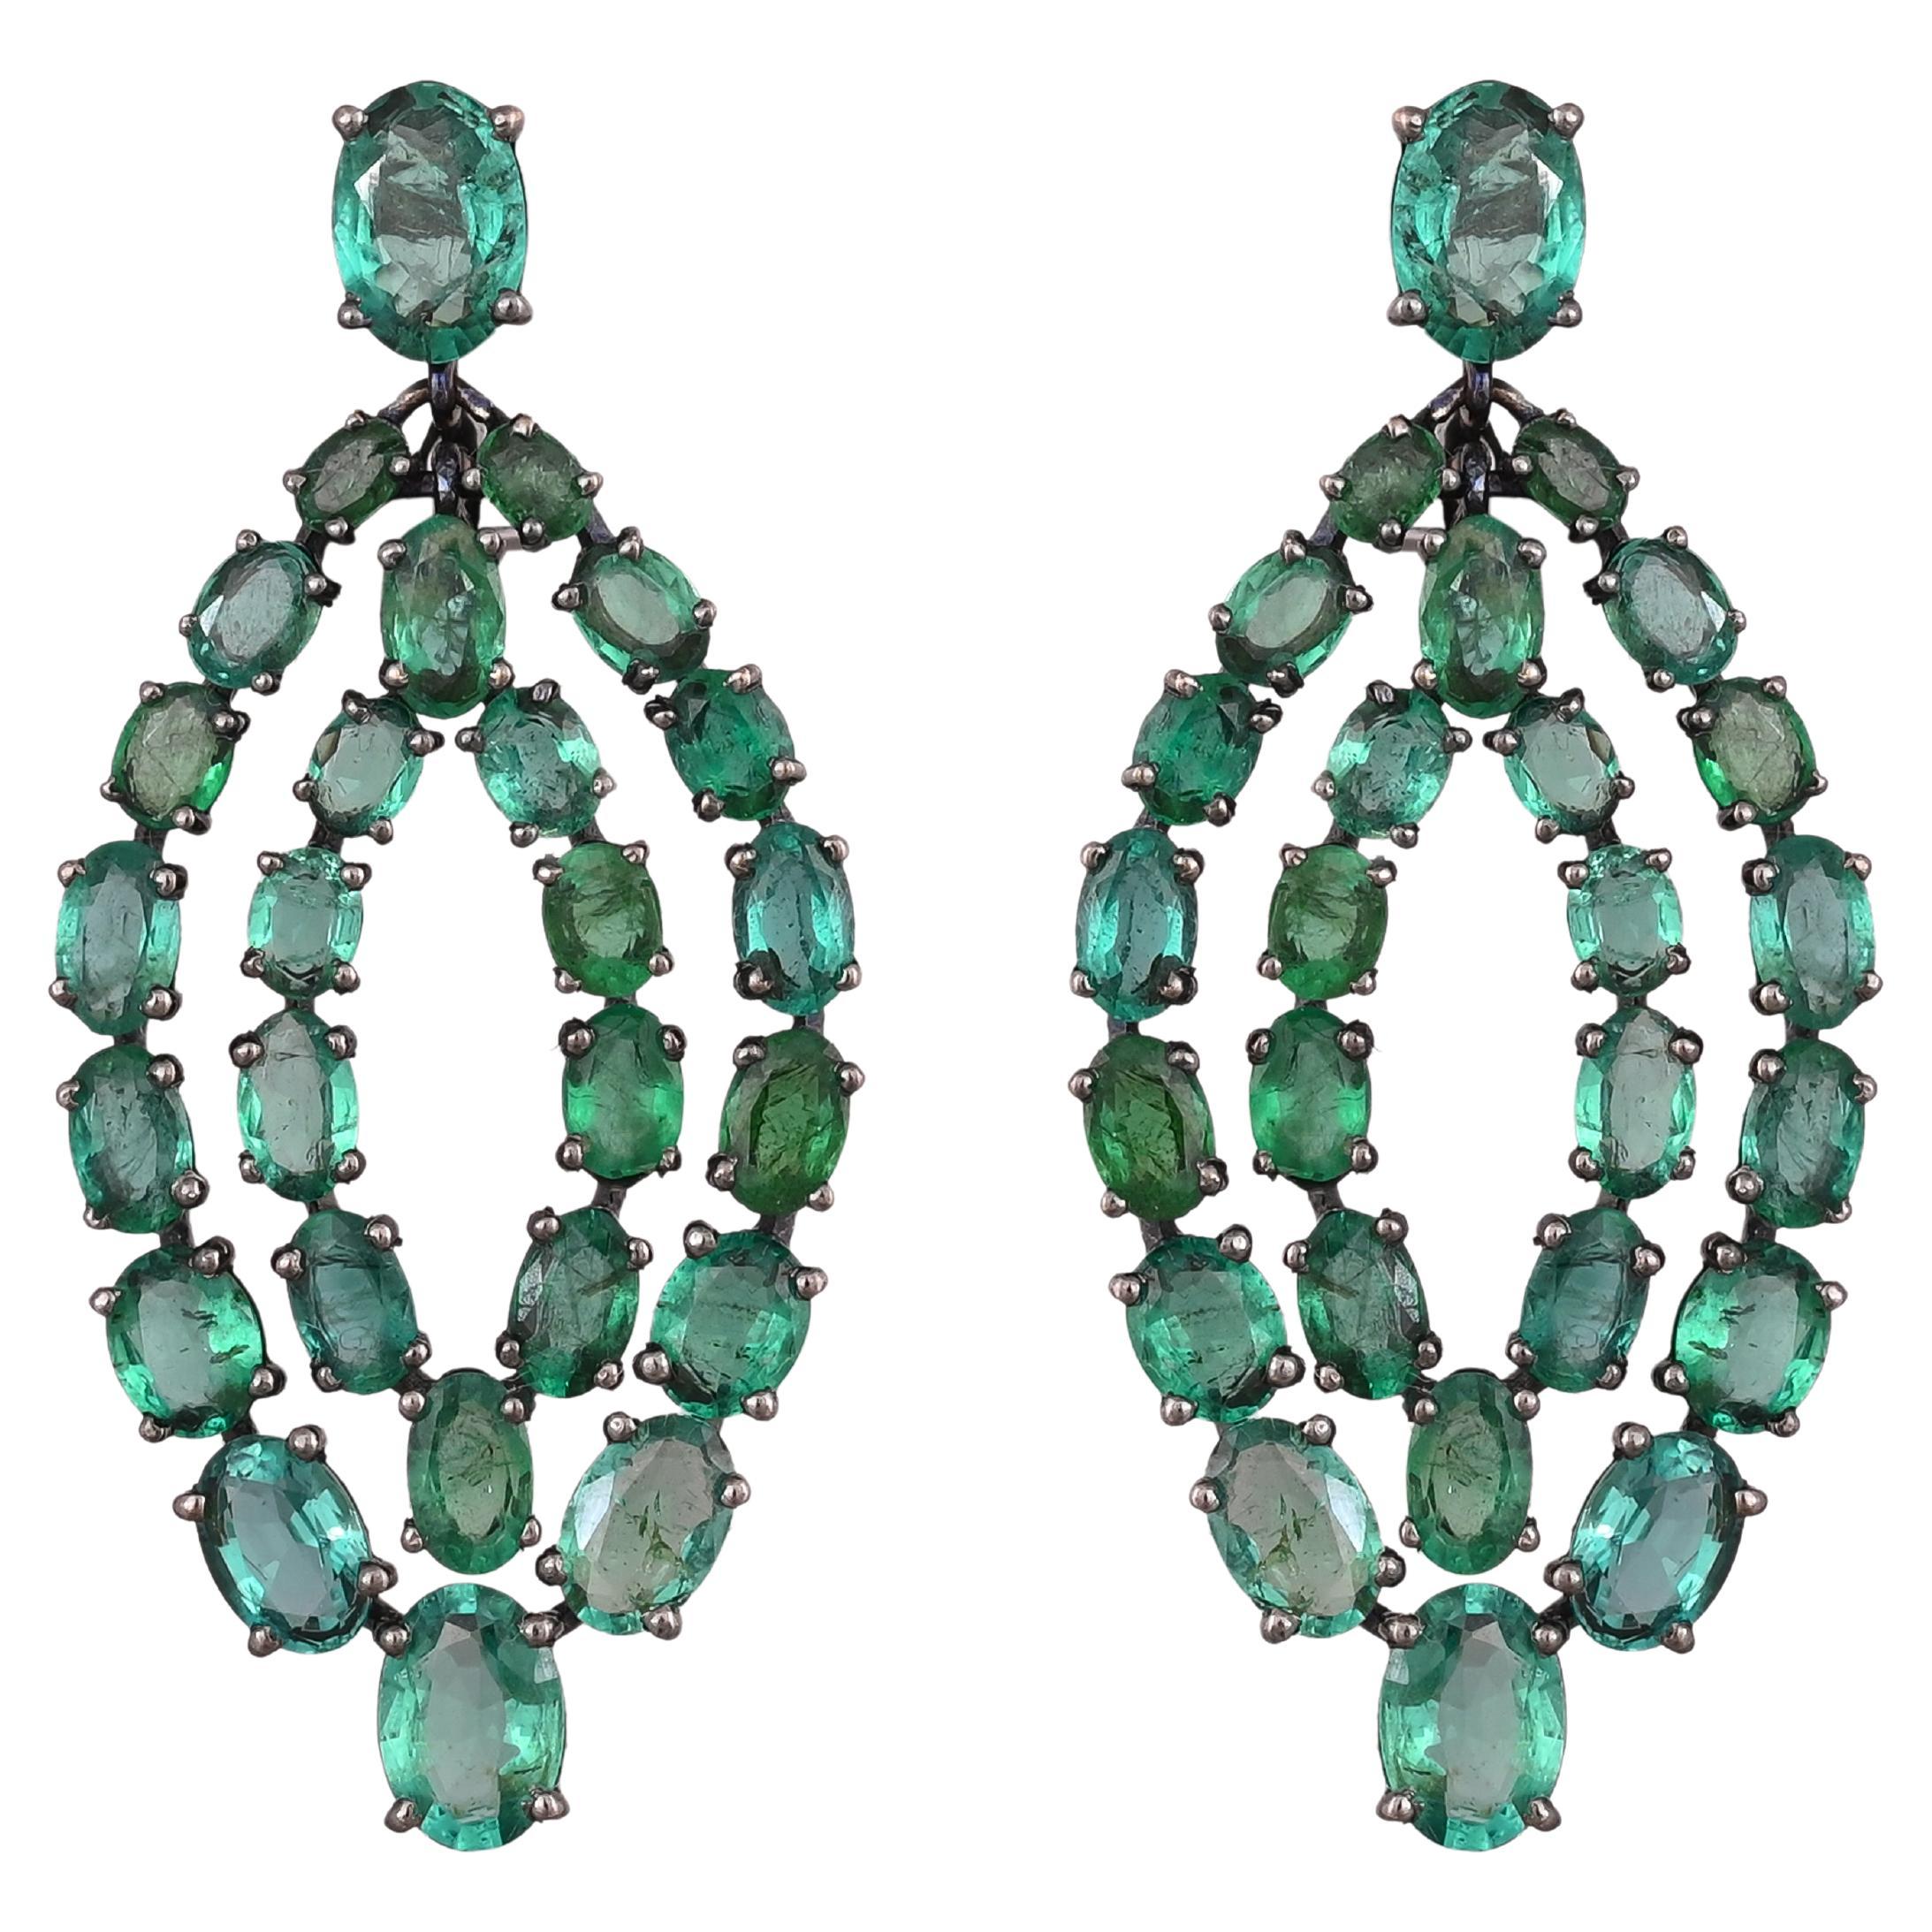 A very gorgeous and beautiful, Art Deco style Emerald Dangle Earrings set in 18K Blackened Gold. The weight of the Emeralds is 12.74 carats. The Emeralds are completely natural, without any treatment and is of Zambian origin. Net Gold weight is